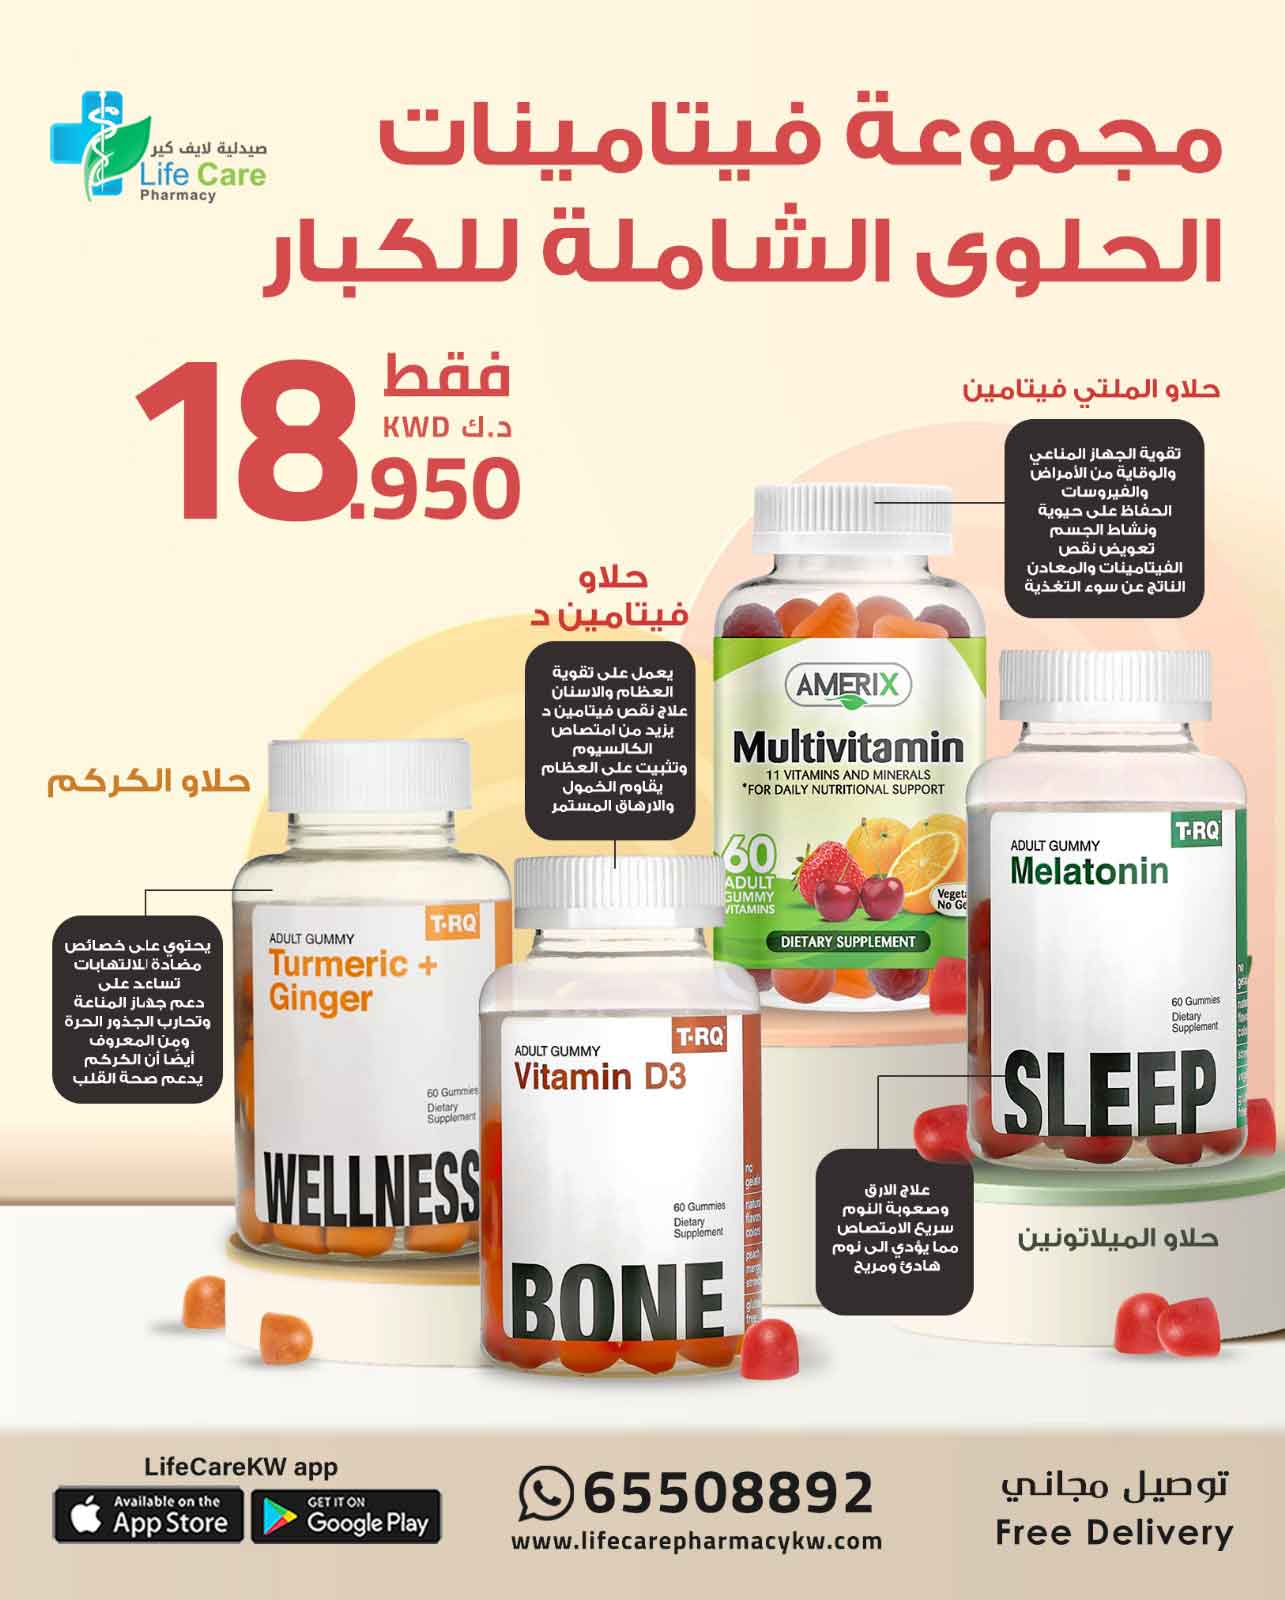 PACKAGE 241 - Life Care Pharmacy